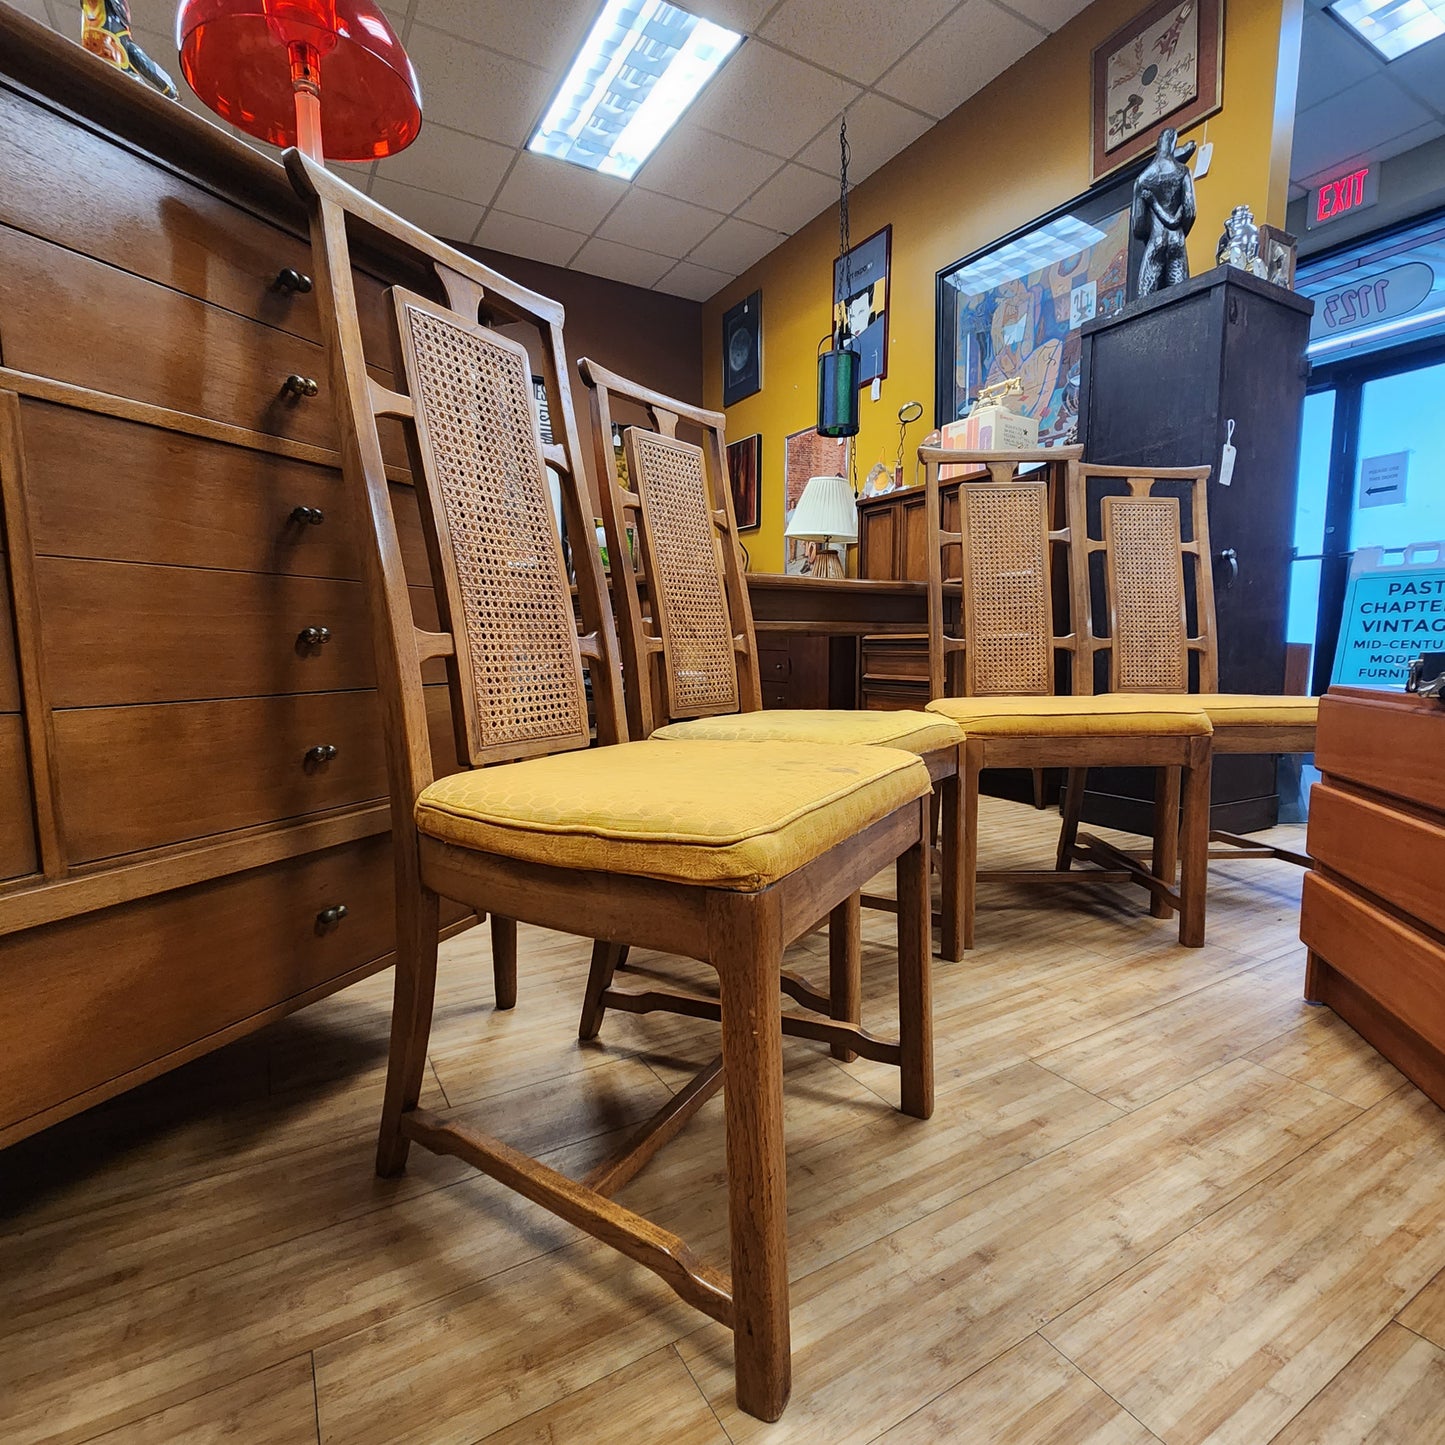 Mid-Century Thomasville Dining Table With 4 Chairs